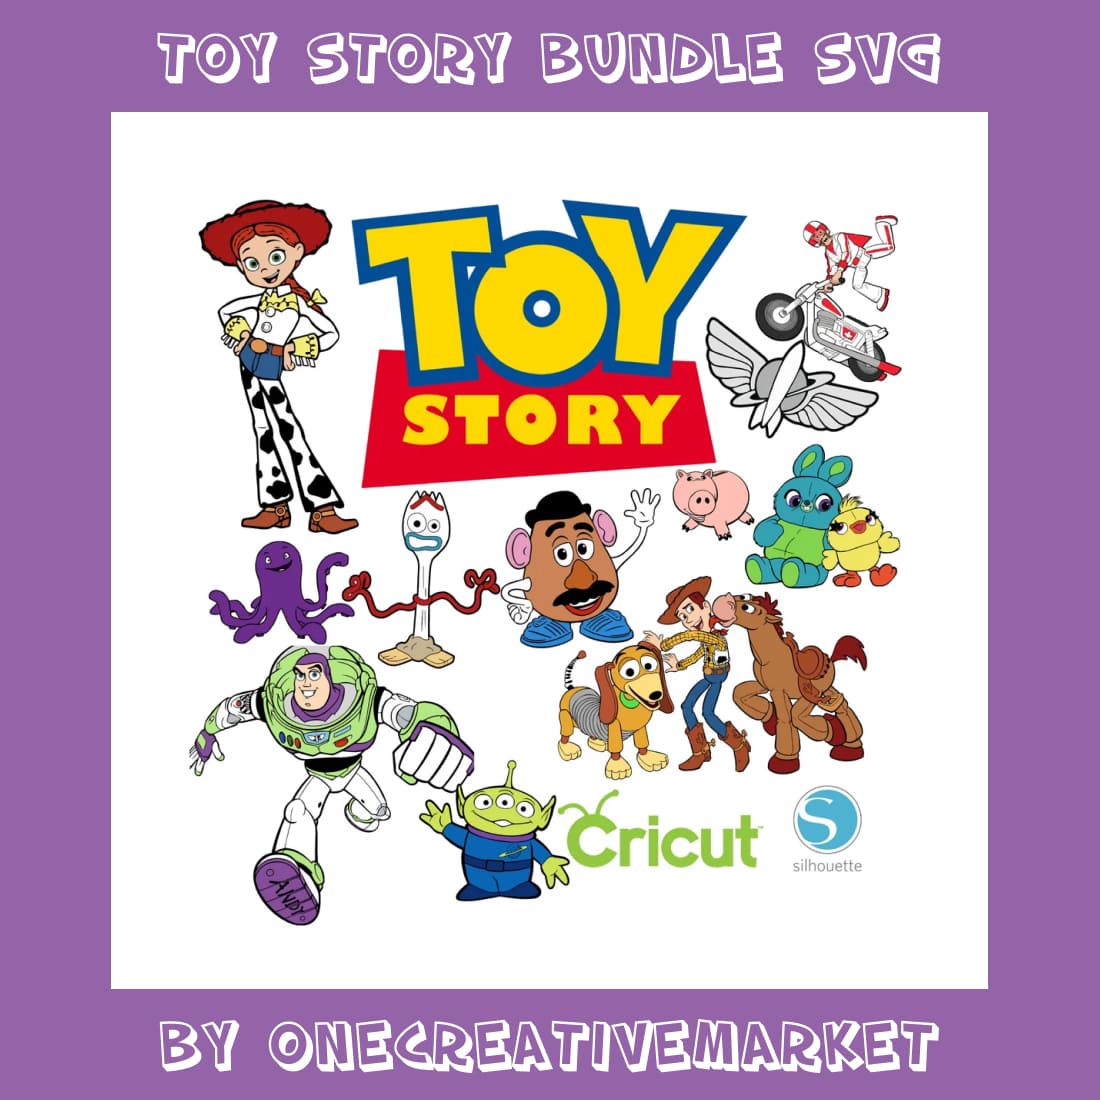 65 Toy Story Bundle SVG for Cricut and Silhouette Cutting Machines.